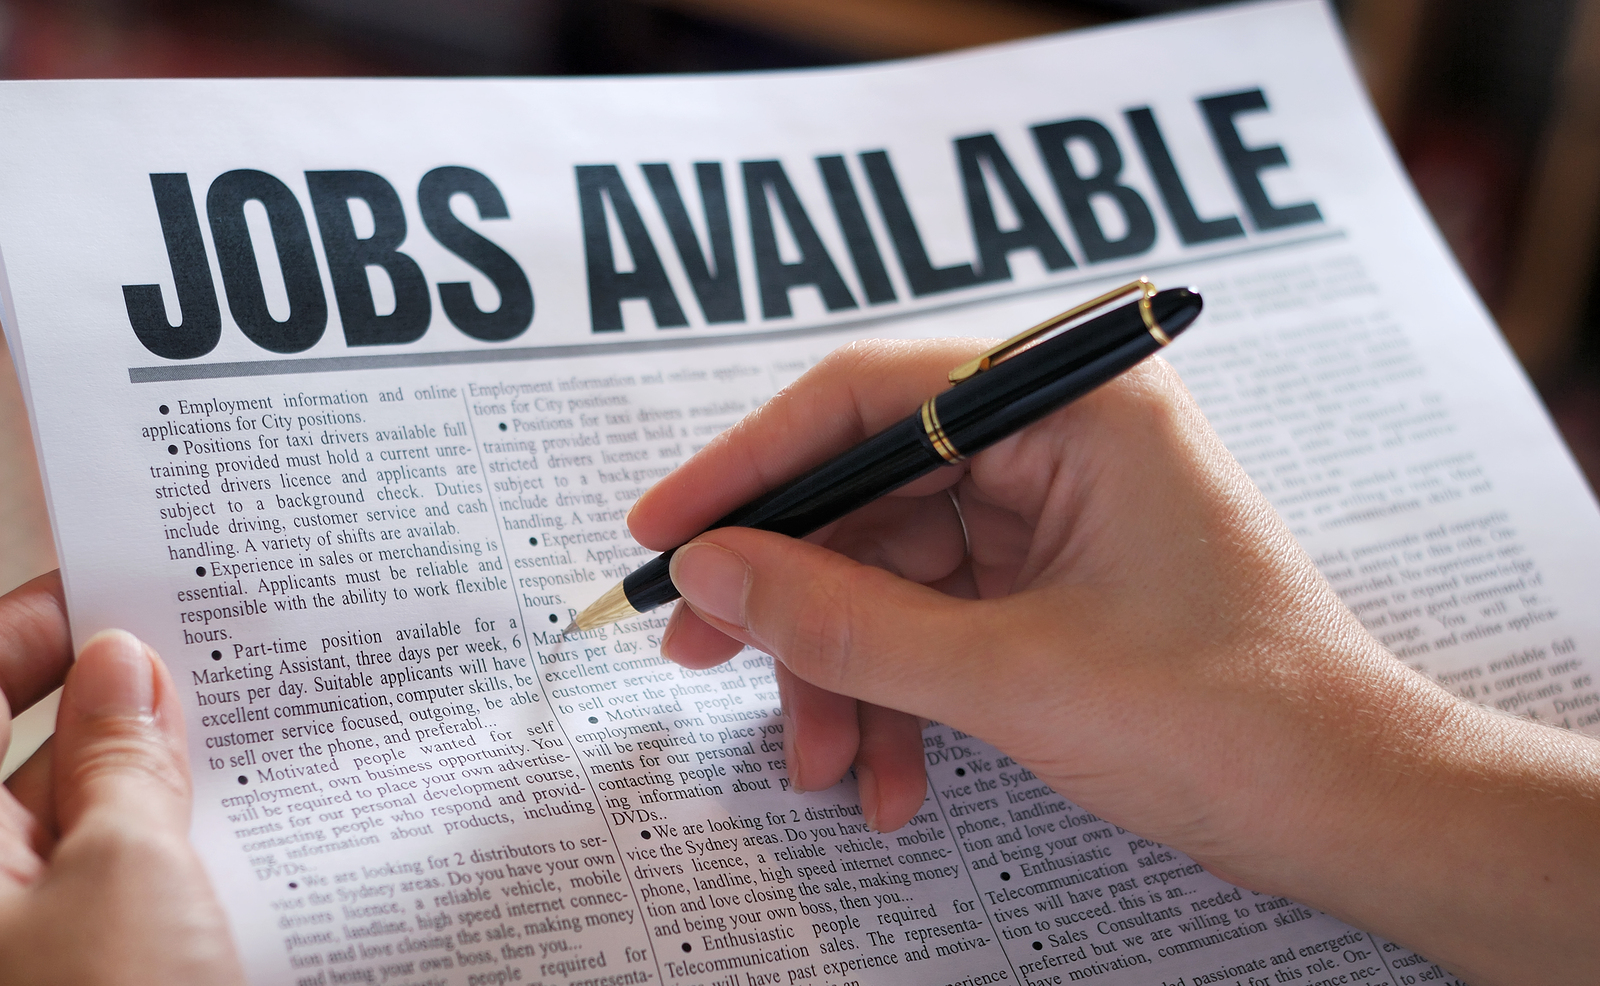 Job openings for content writers